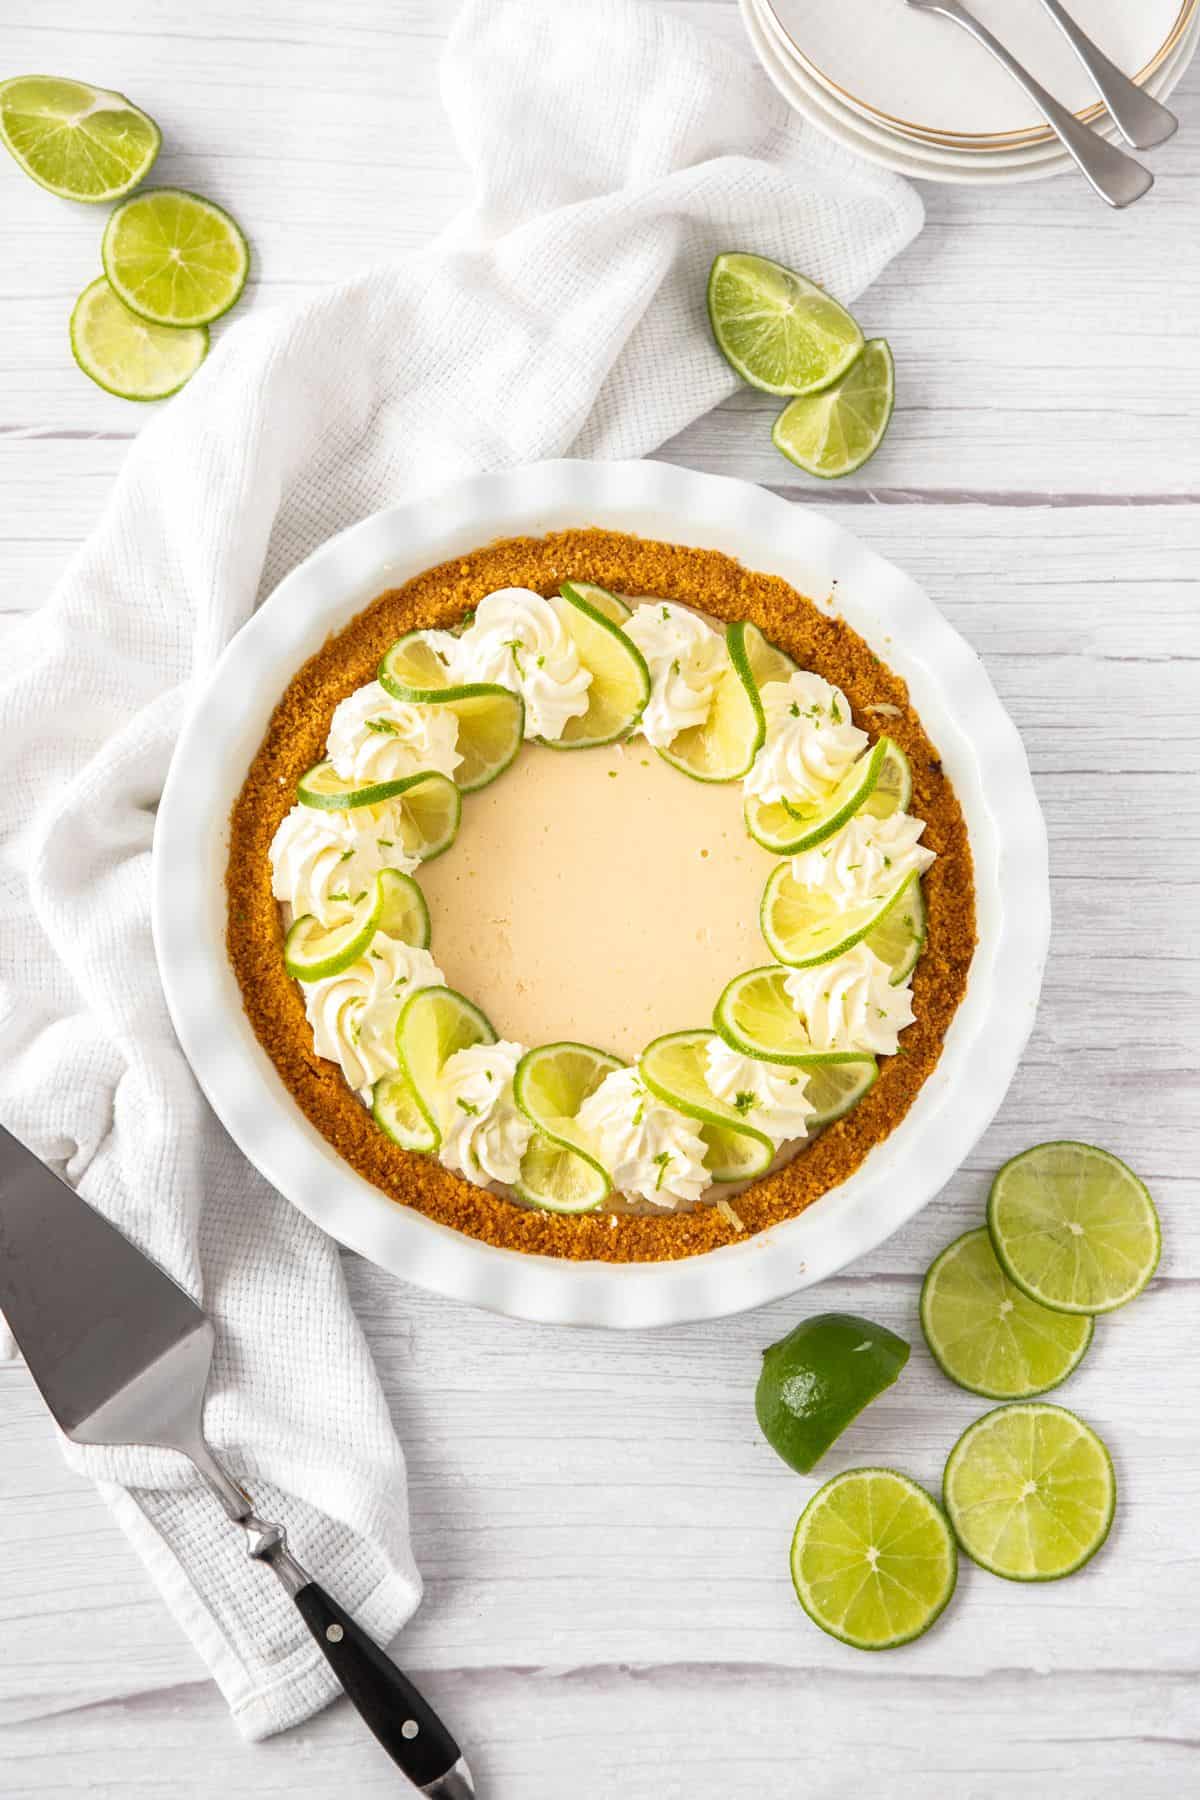 Overhead shot of whole key lime pie, sitting on a white cloth.